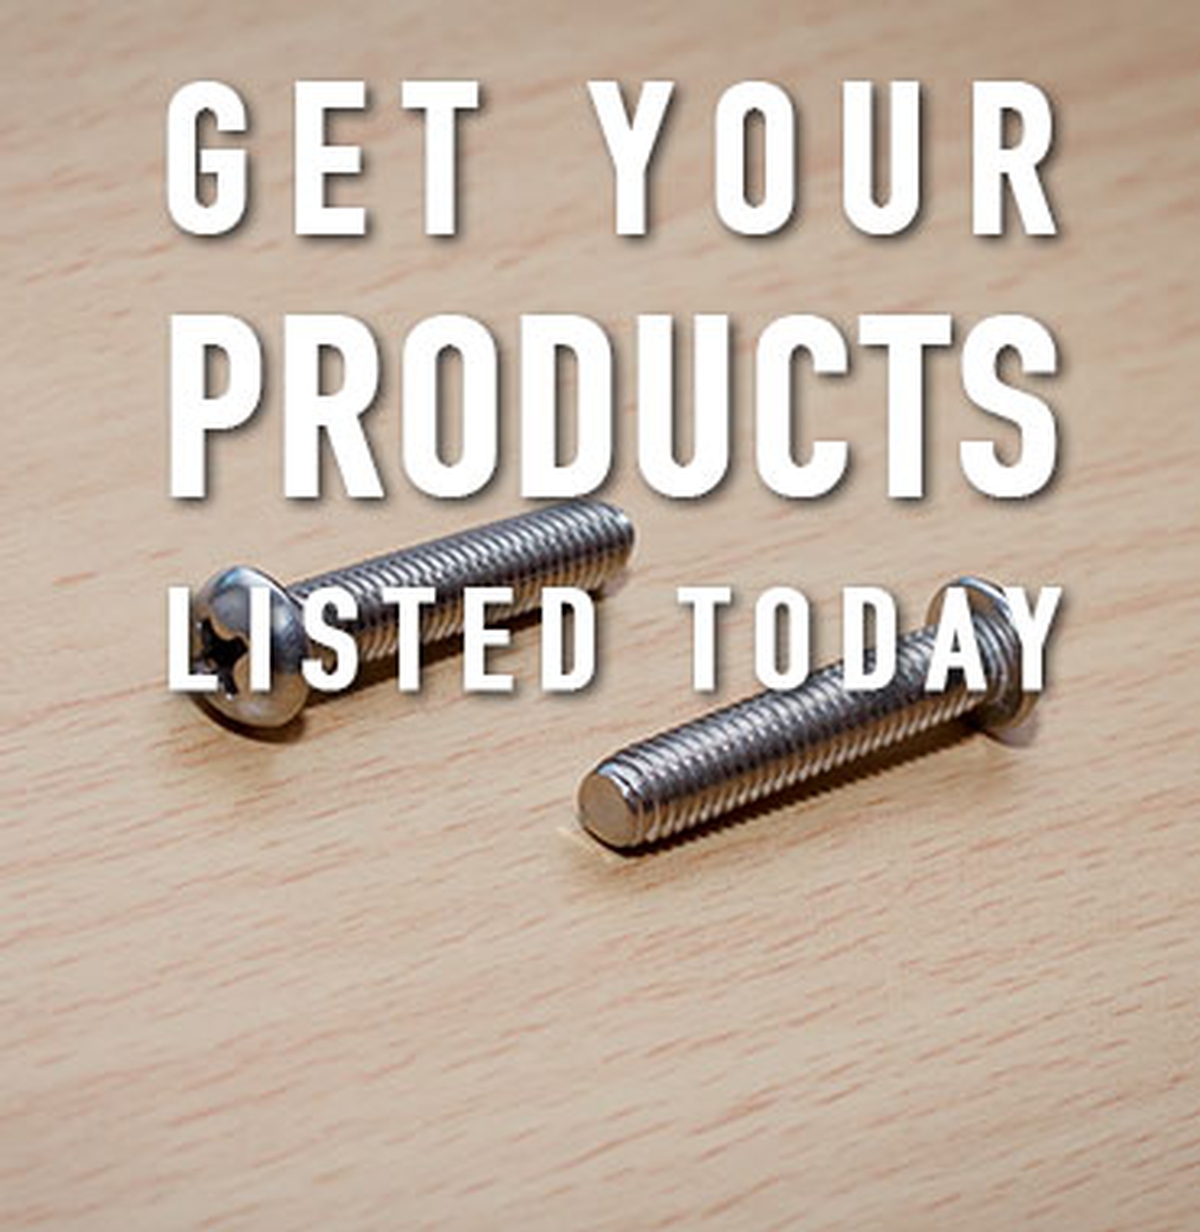 Shop Manufactured in Wisconsin - List Your Products for Free